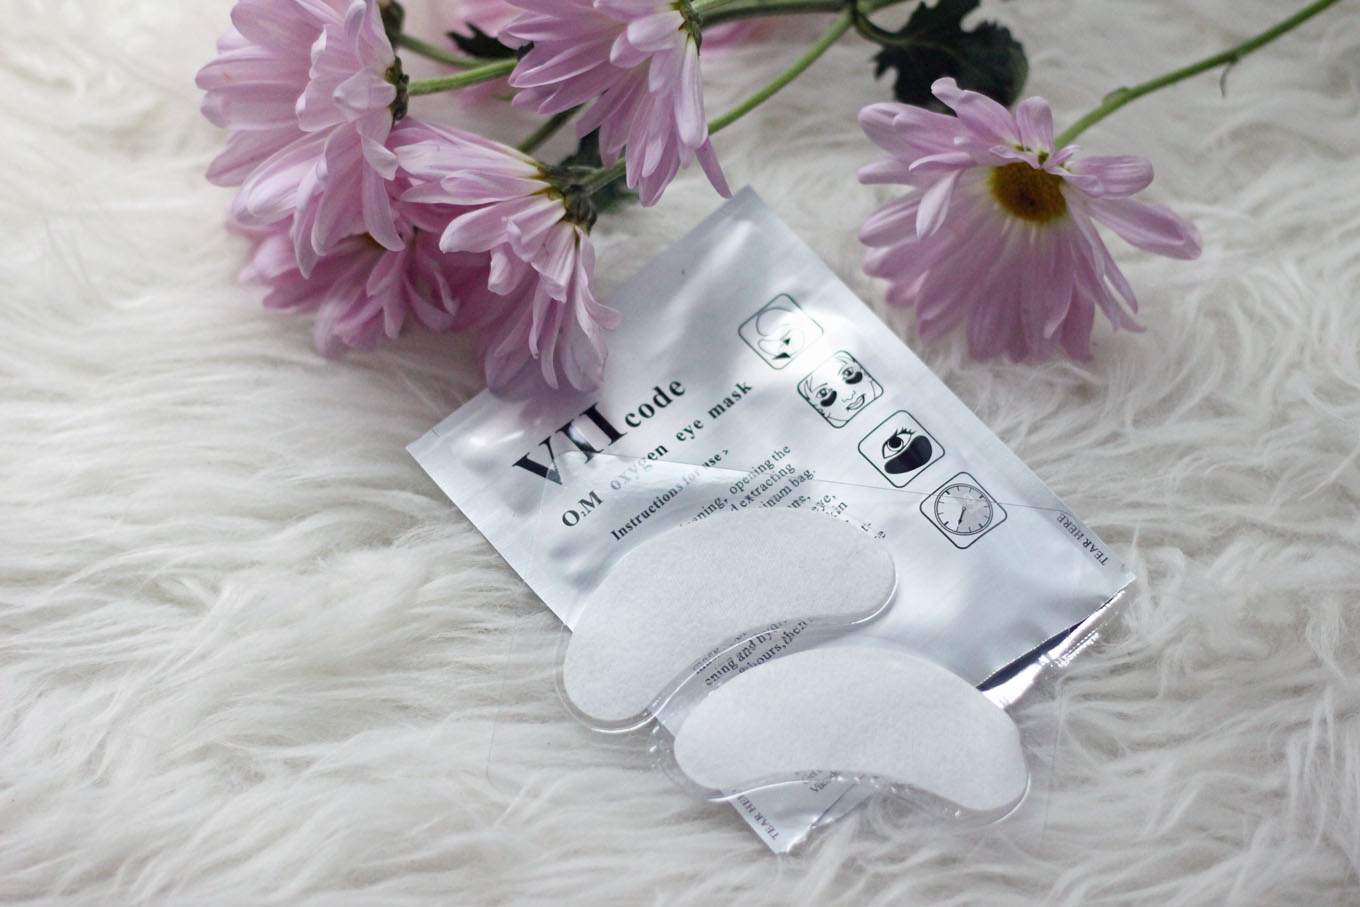 Lifestyle blogger Roxanne of Glass of Glam's ways to look and feel energized with Viicode gel eye masks